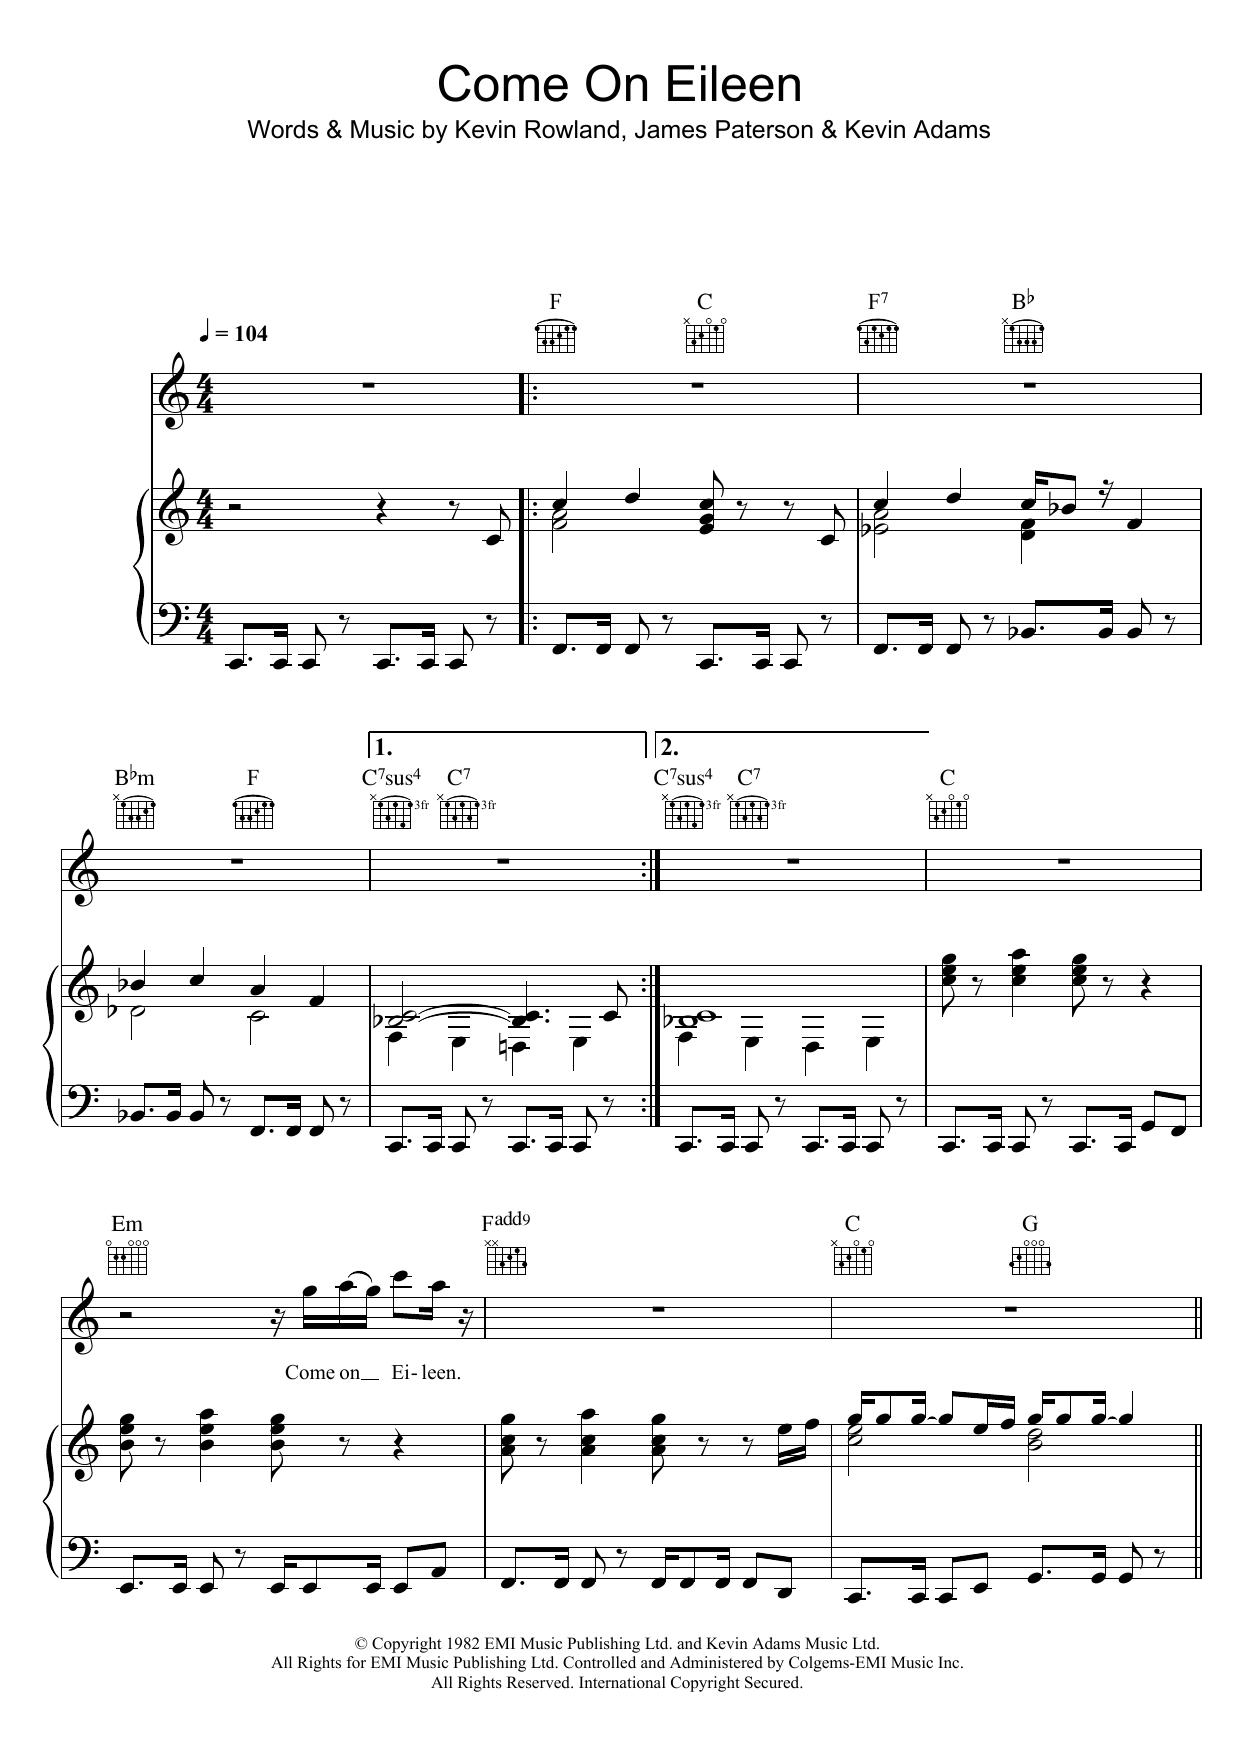 Download Dexy's Midnight Runners Come On Eileen Sheet Music